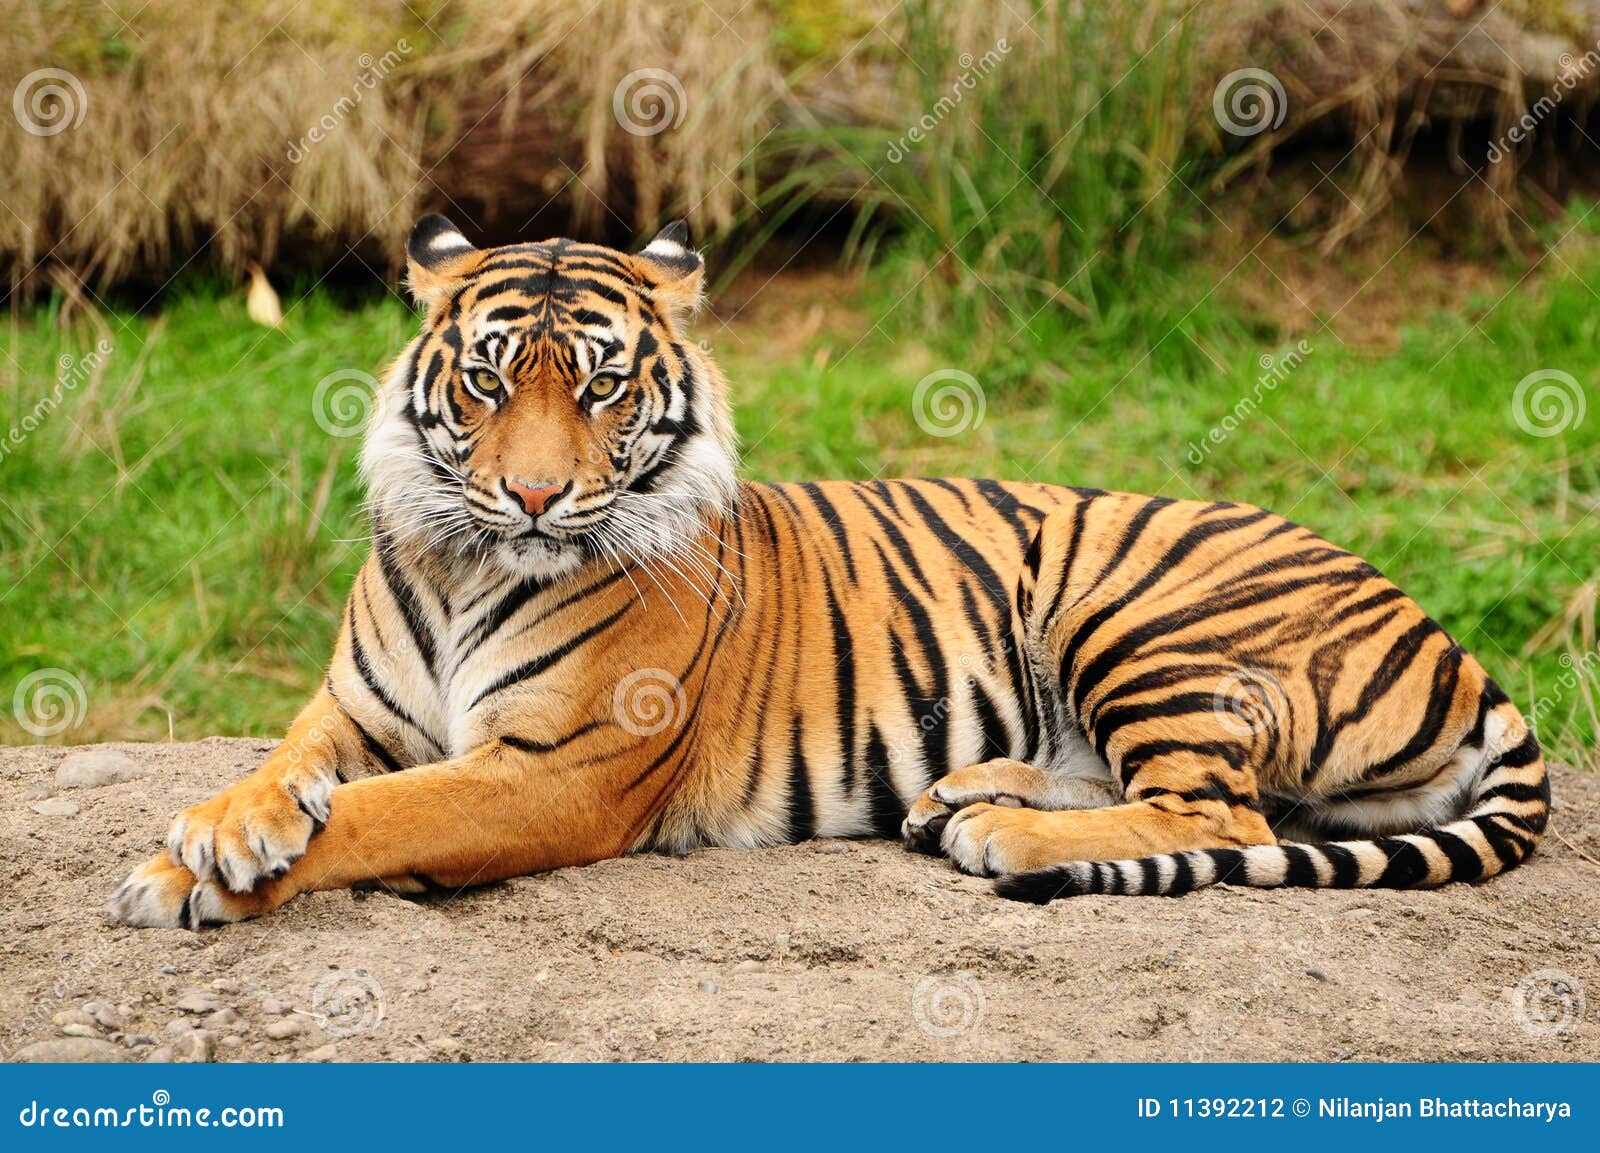 141,566 Tiger Photos - Free & Royalty-Free Stock Photos from Dreamstime